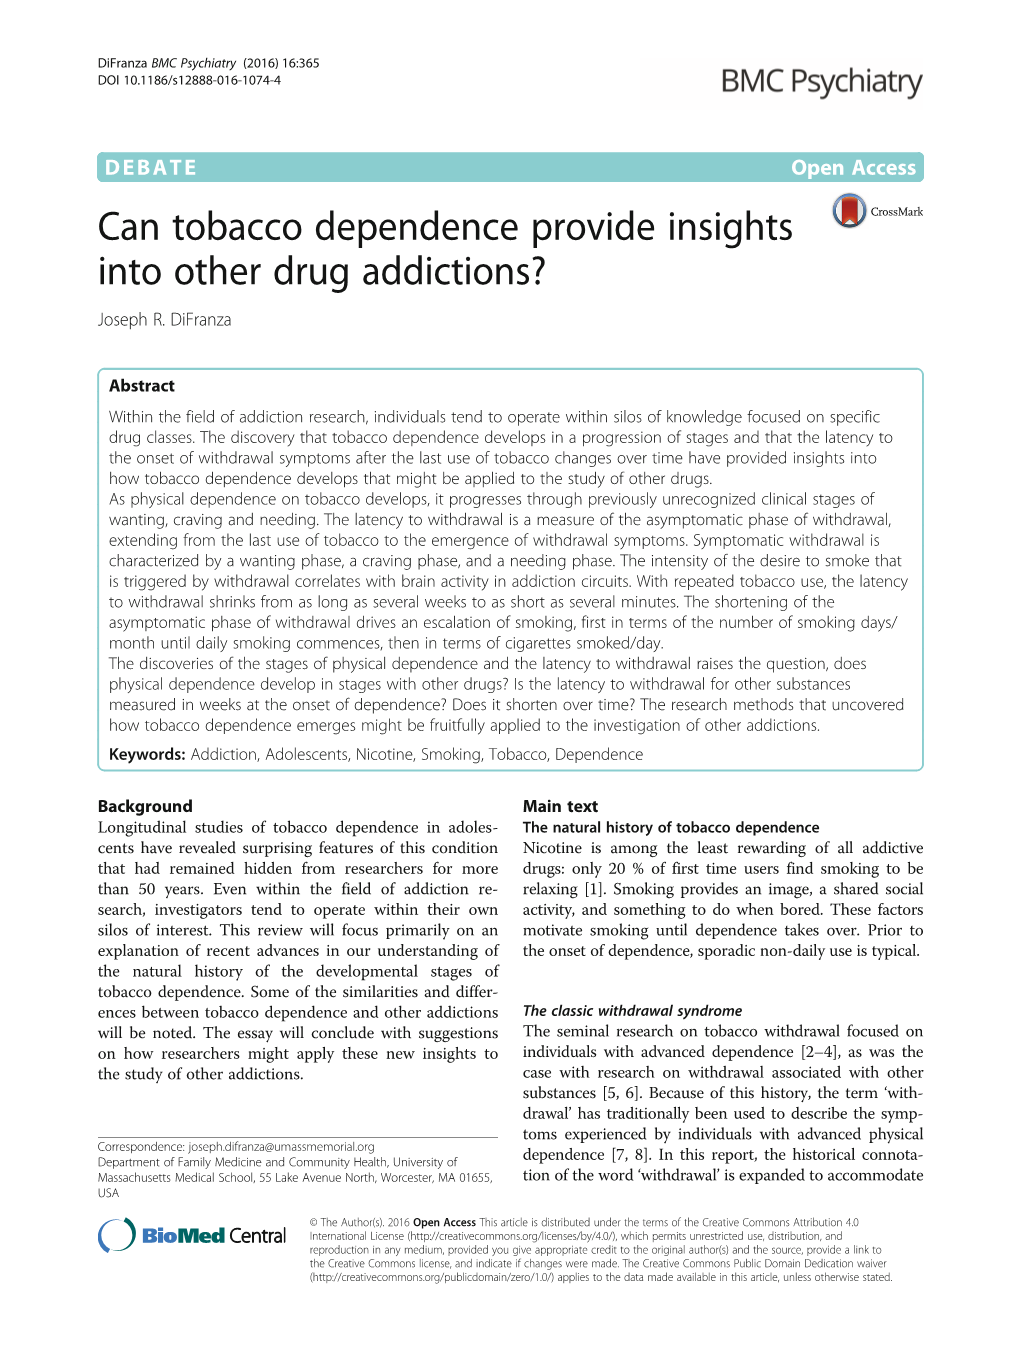 Can Tobacco Dependence Provide Insights Into Other Drug Addictions? Joseph R